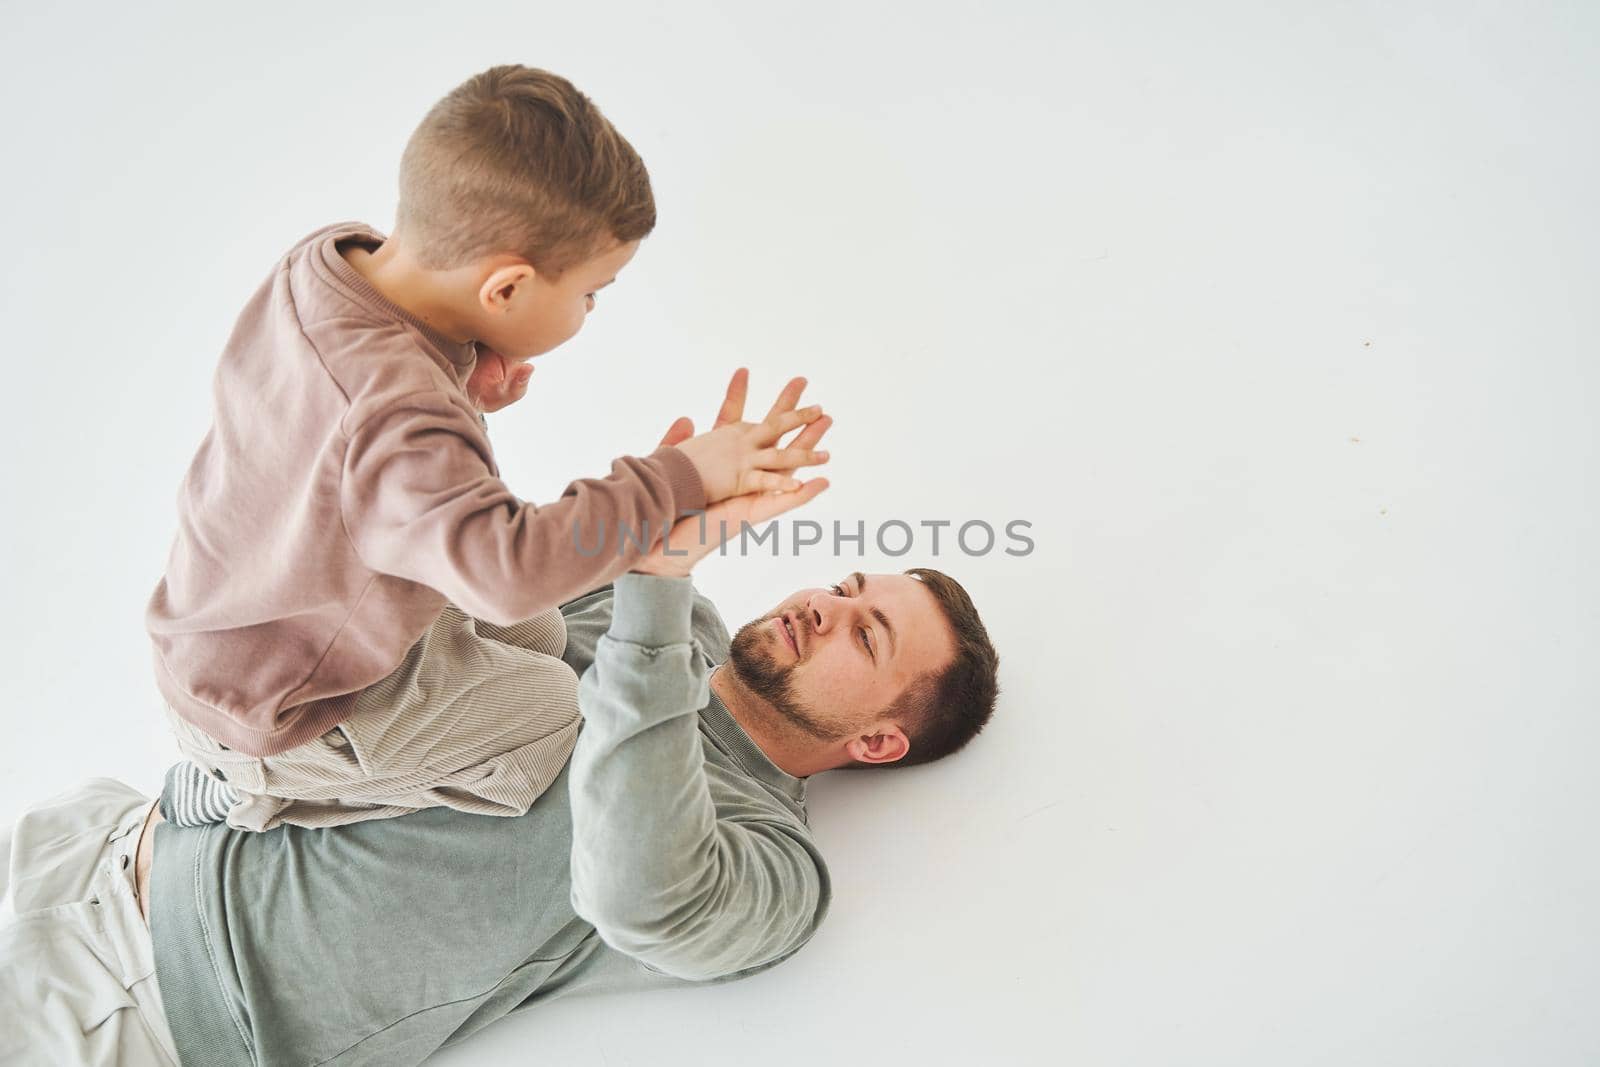 Father and son have fun and fool around together on white background. Child laughs with dad. Fatherhood. Child care